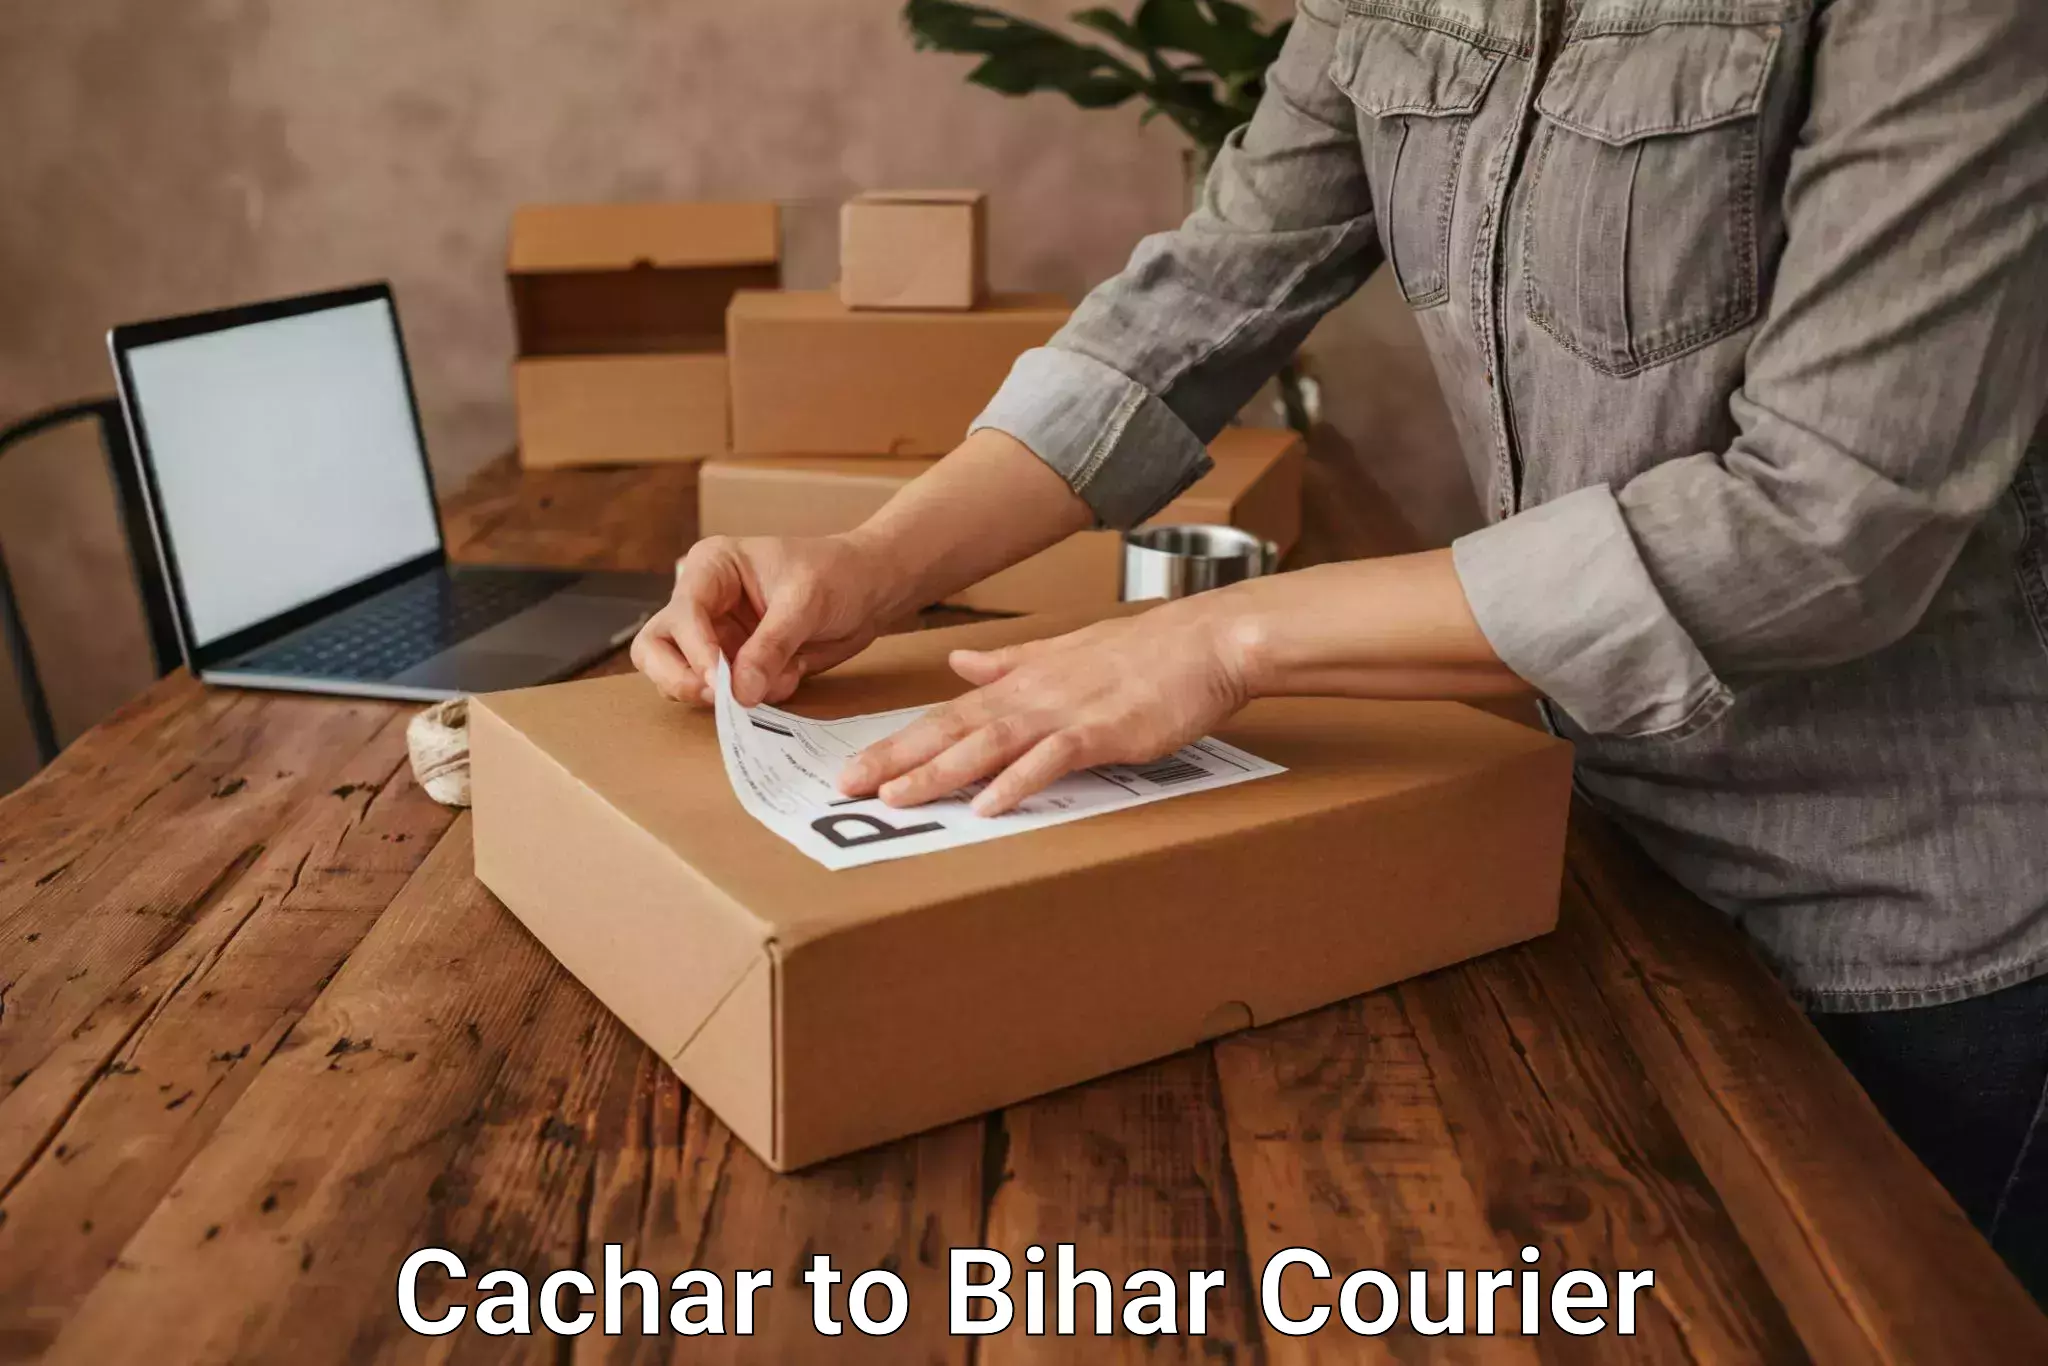 Flexible delivery scheduling Cachar to Dinara